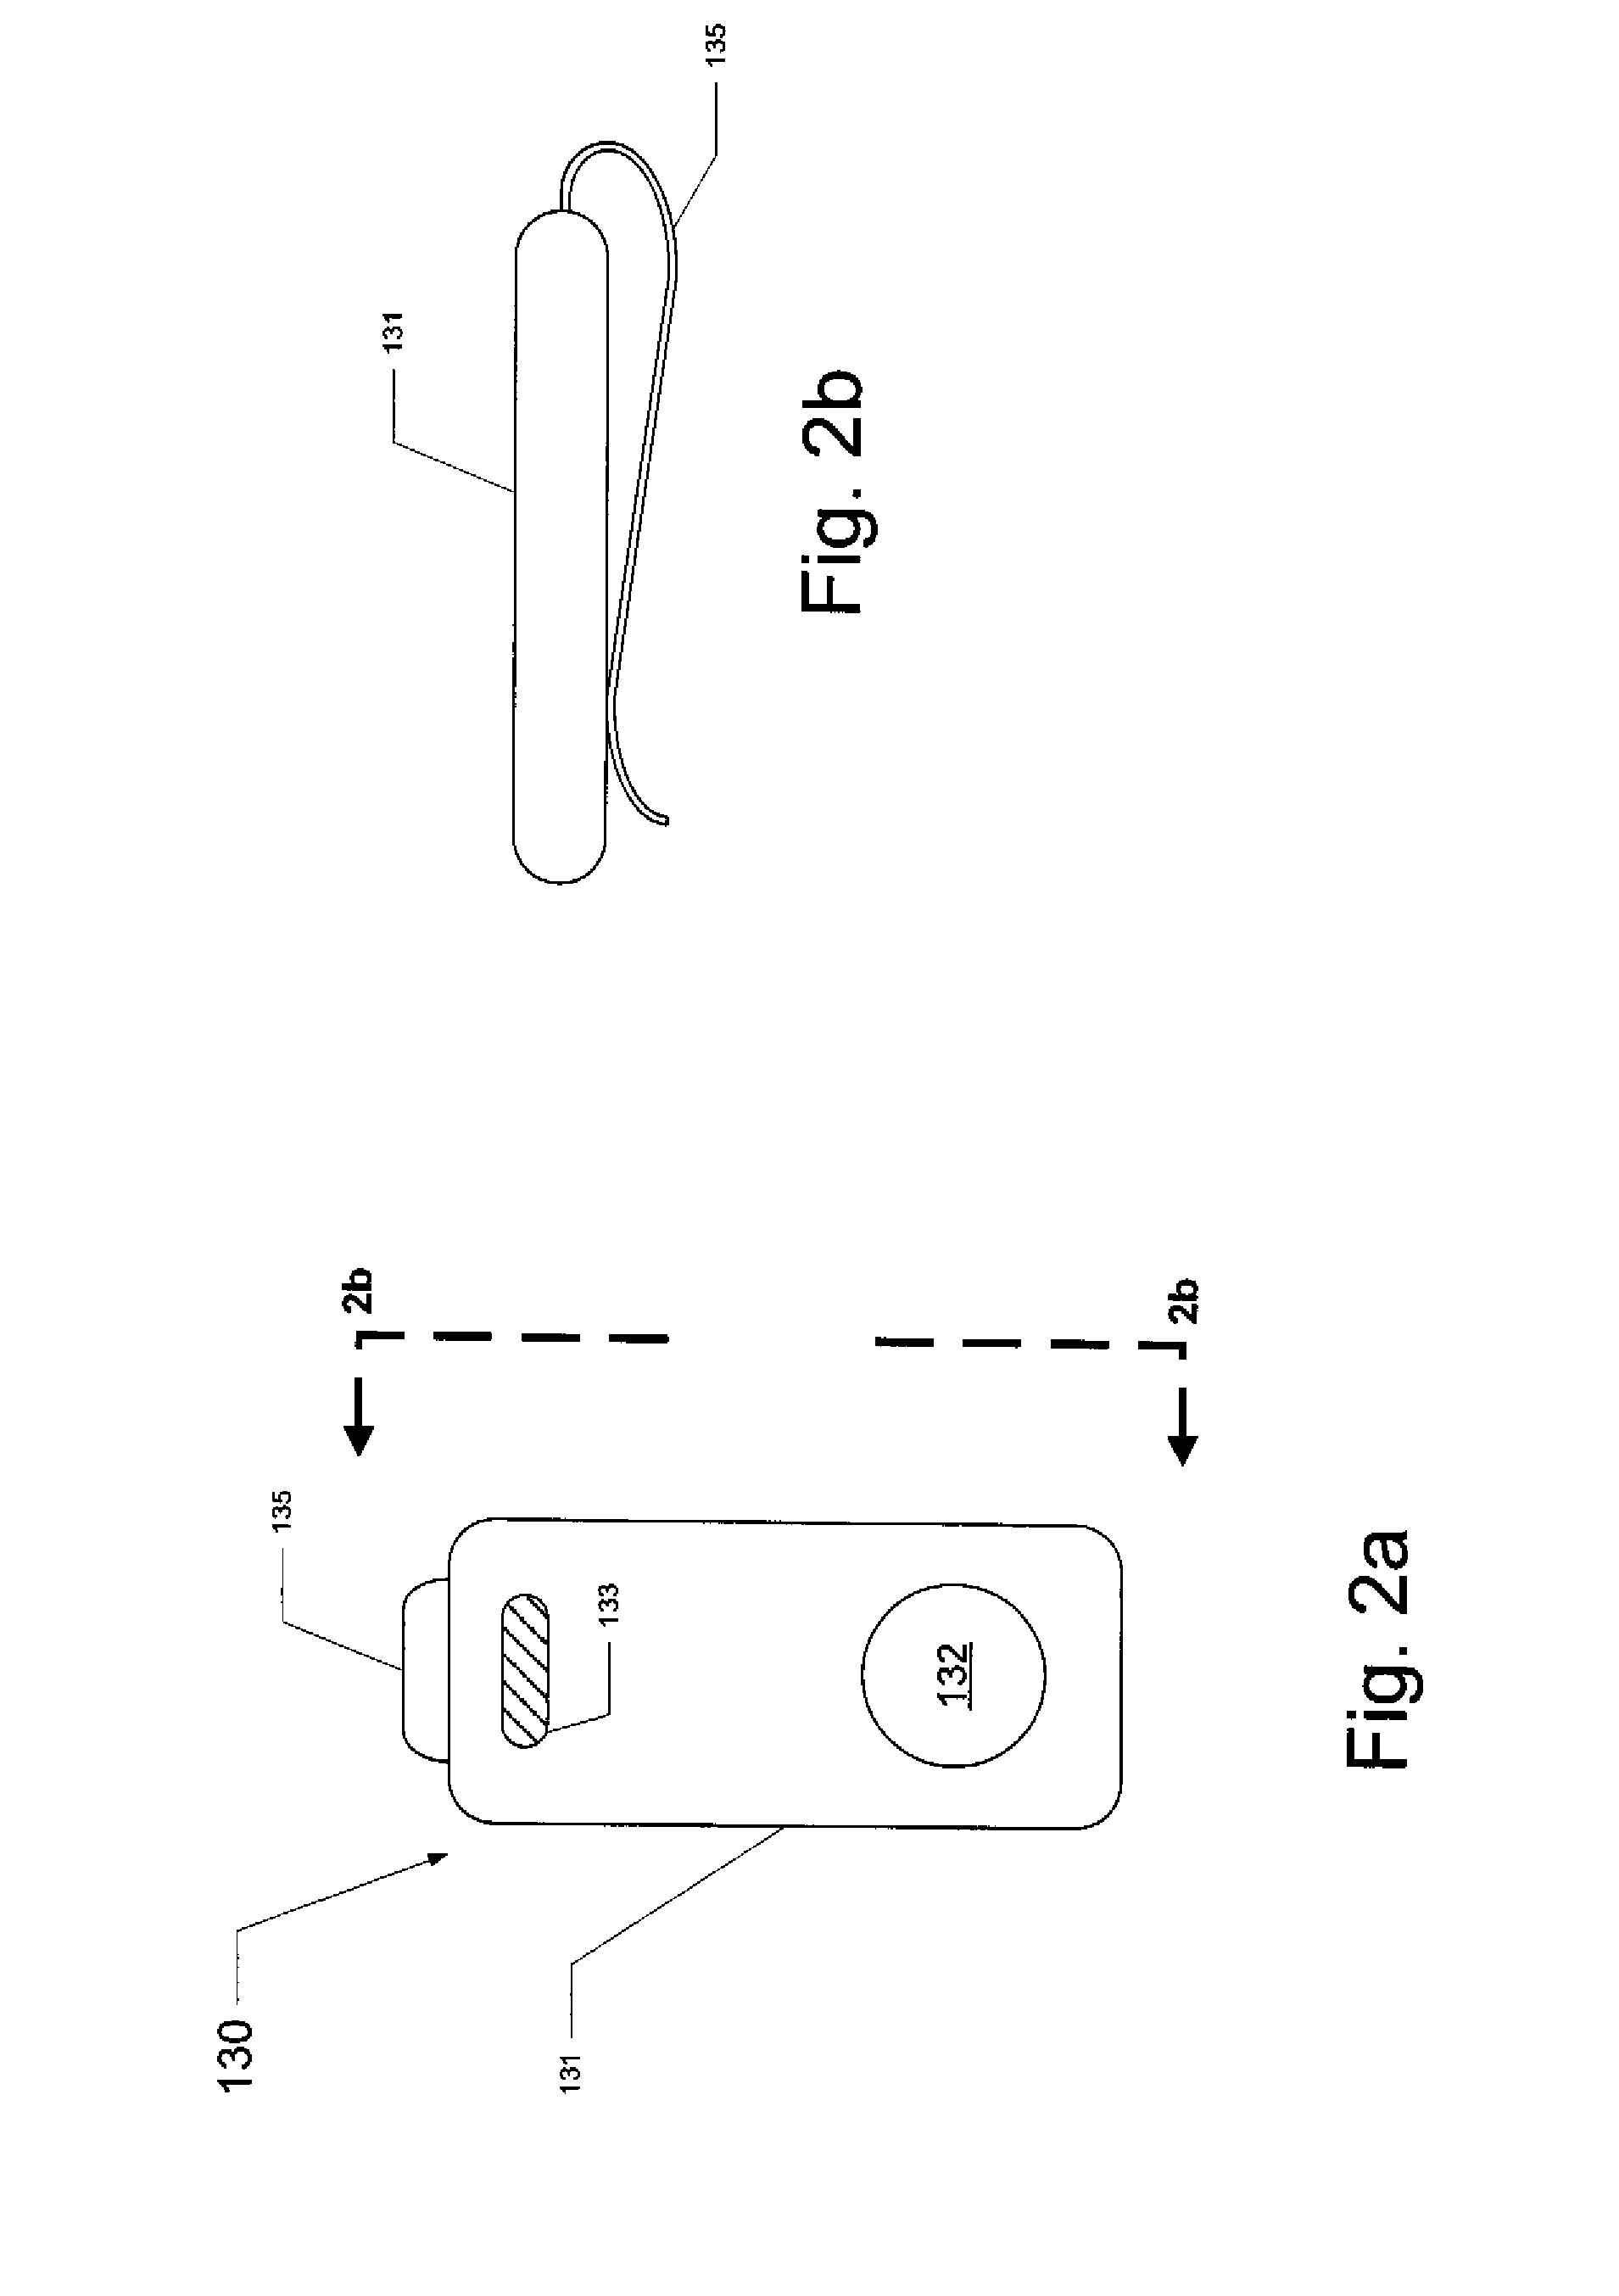 Remote Invocation of Mobile Phone Functionality in an Automobile Environment